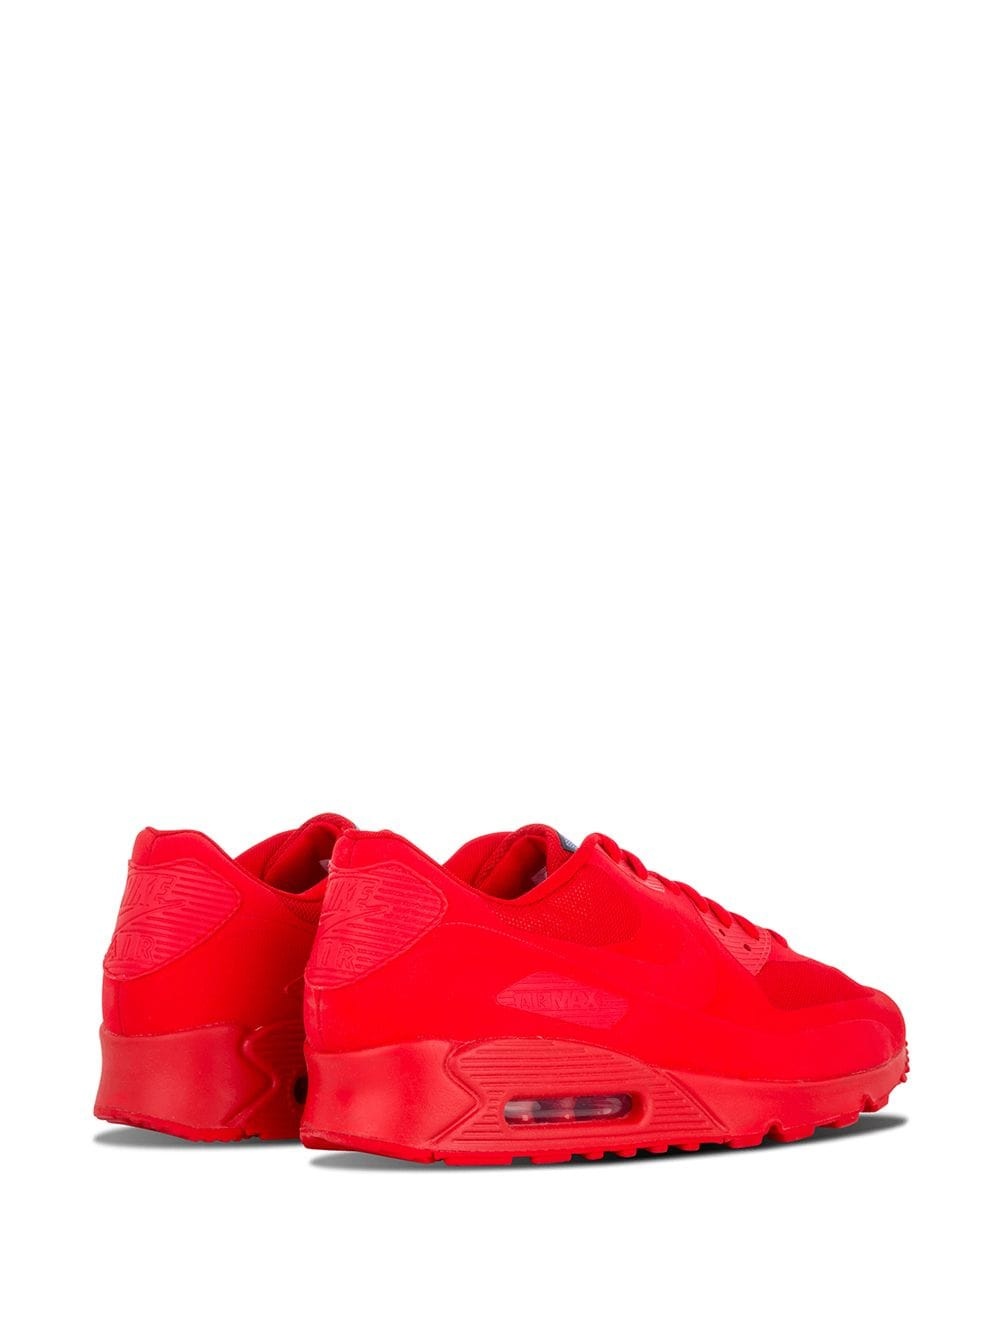 Air Max 90 Hyperfuse QS "Independence Day" sneakers - 3